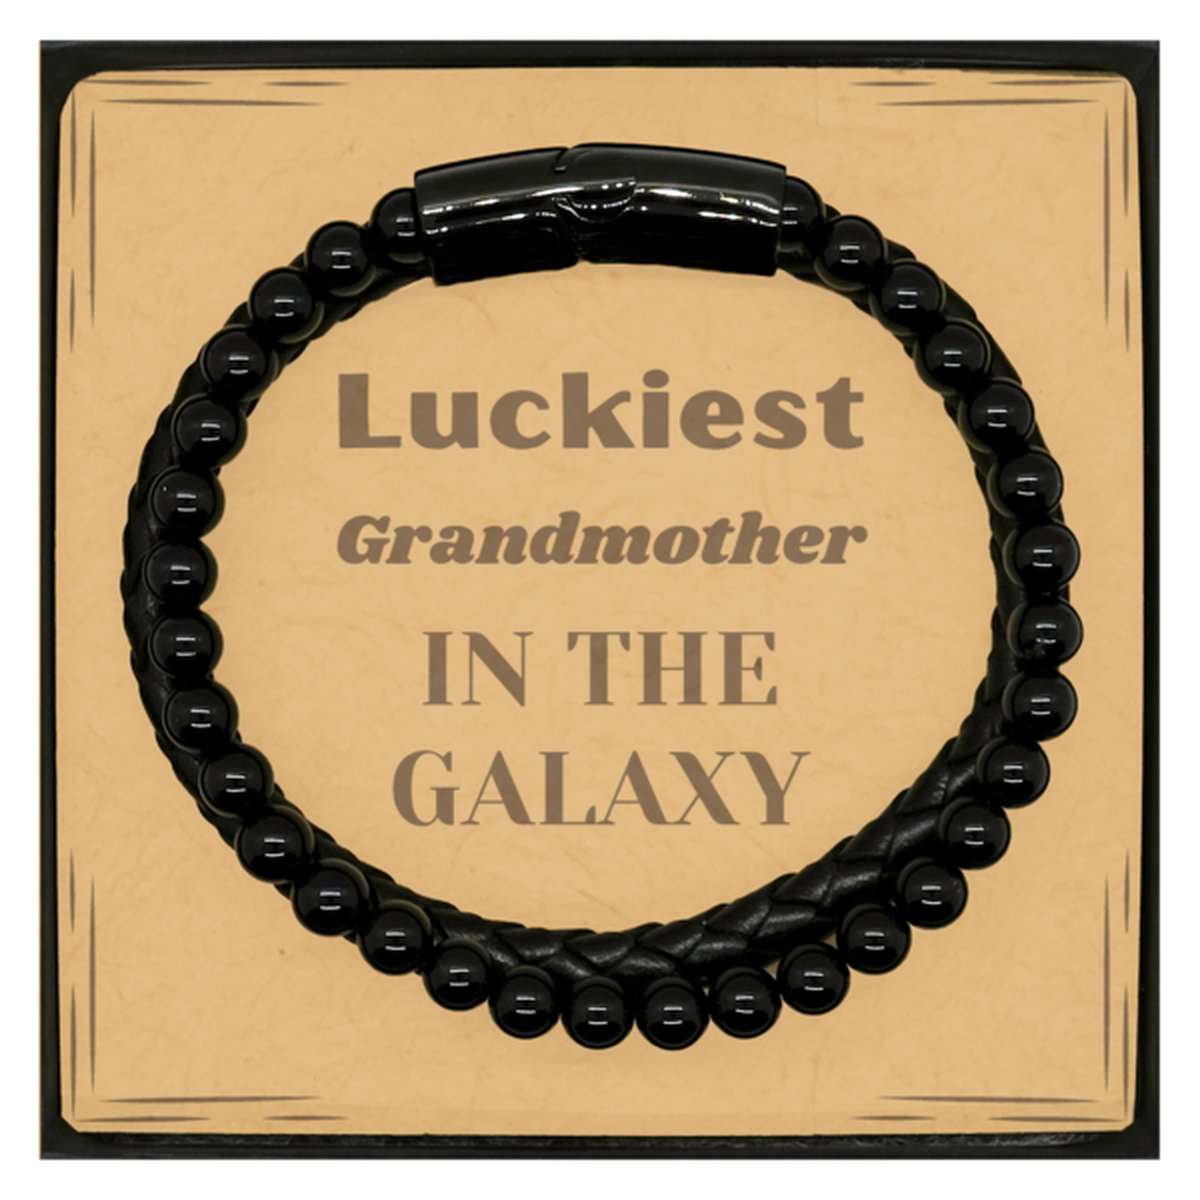 Luckiest Grandmother in the Galaxy, To My Grandmother Message Card Gifts, Christmas Grandmother Stone Leather Bracelets Gifts, X-mas Birthday Unique Gifts For Grandmother Men Women